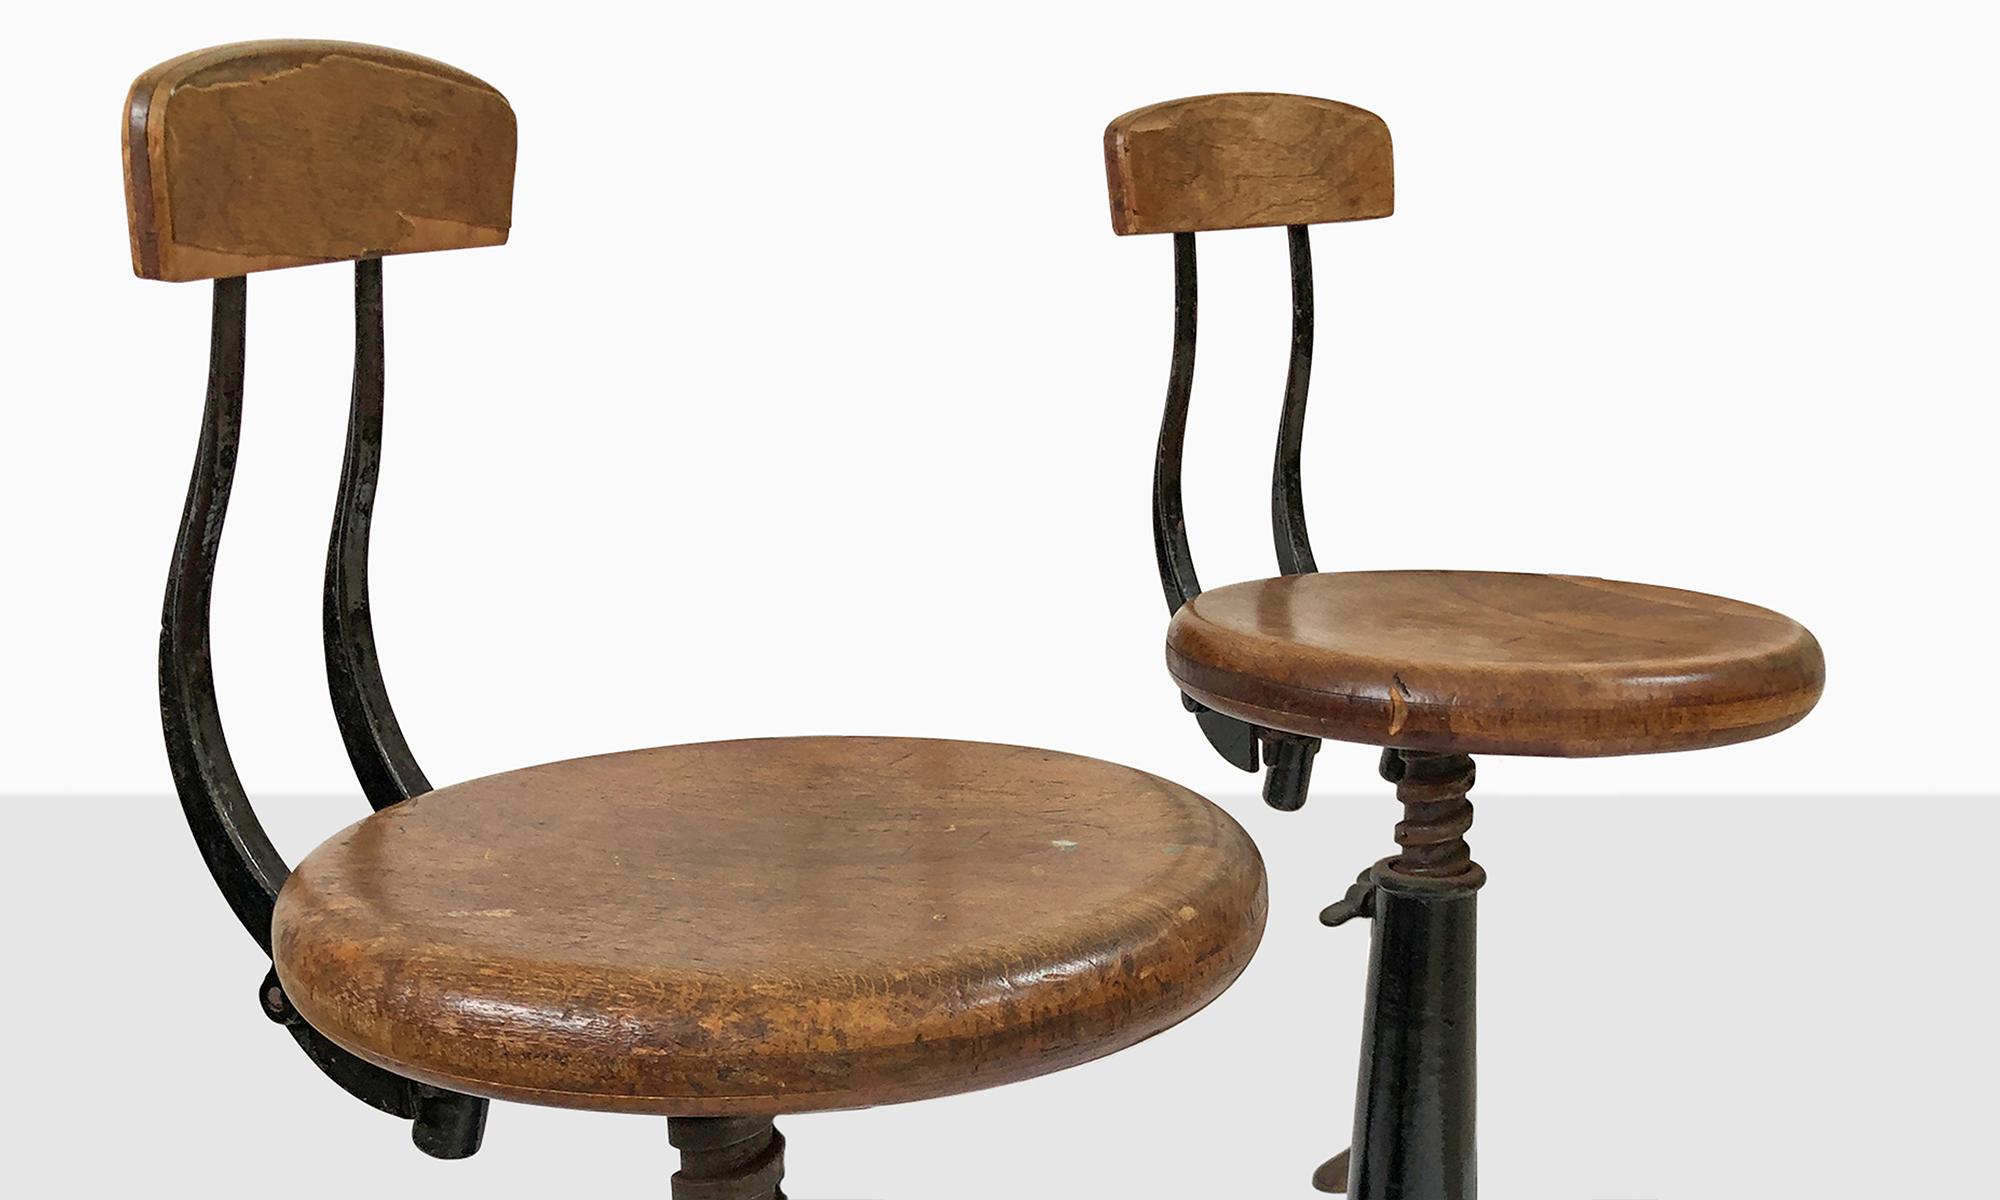 Wooden button shapes seats with sprung backrests and adjustable seat height.